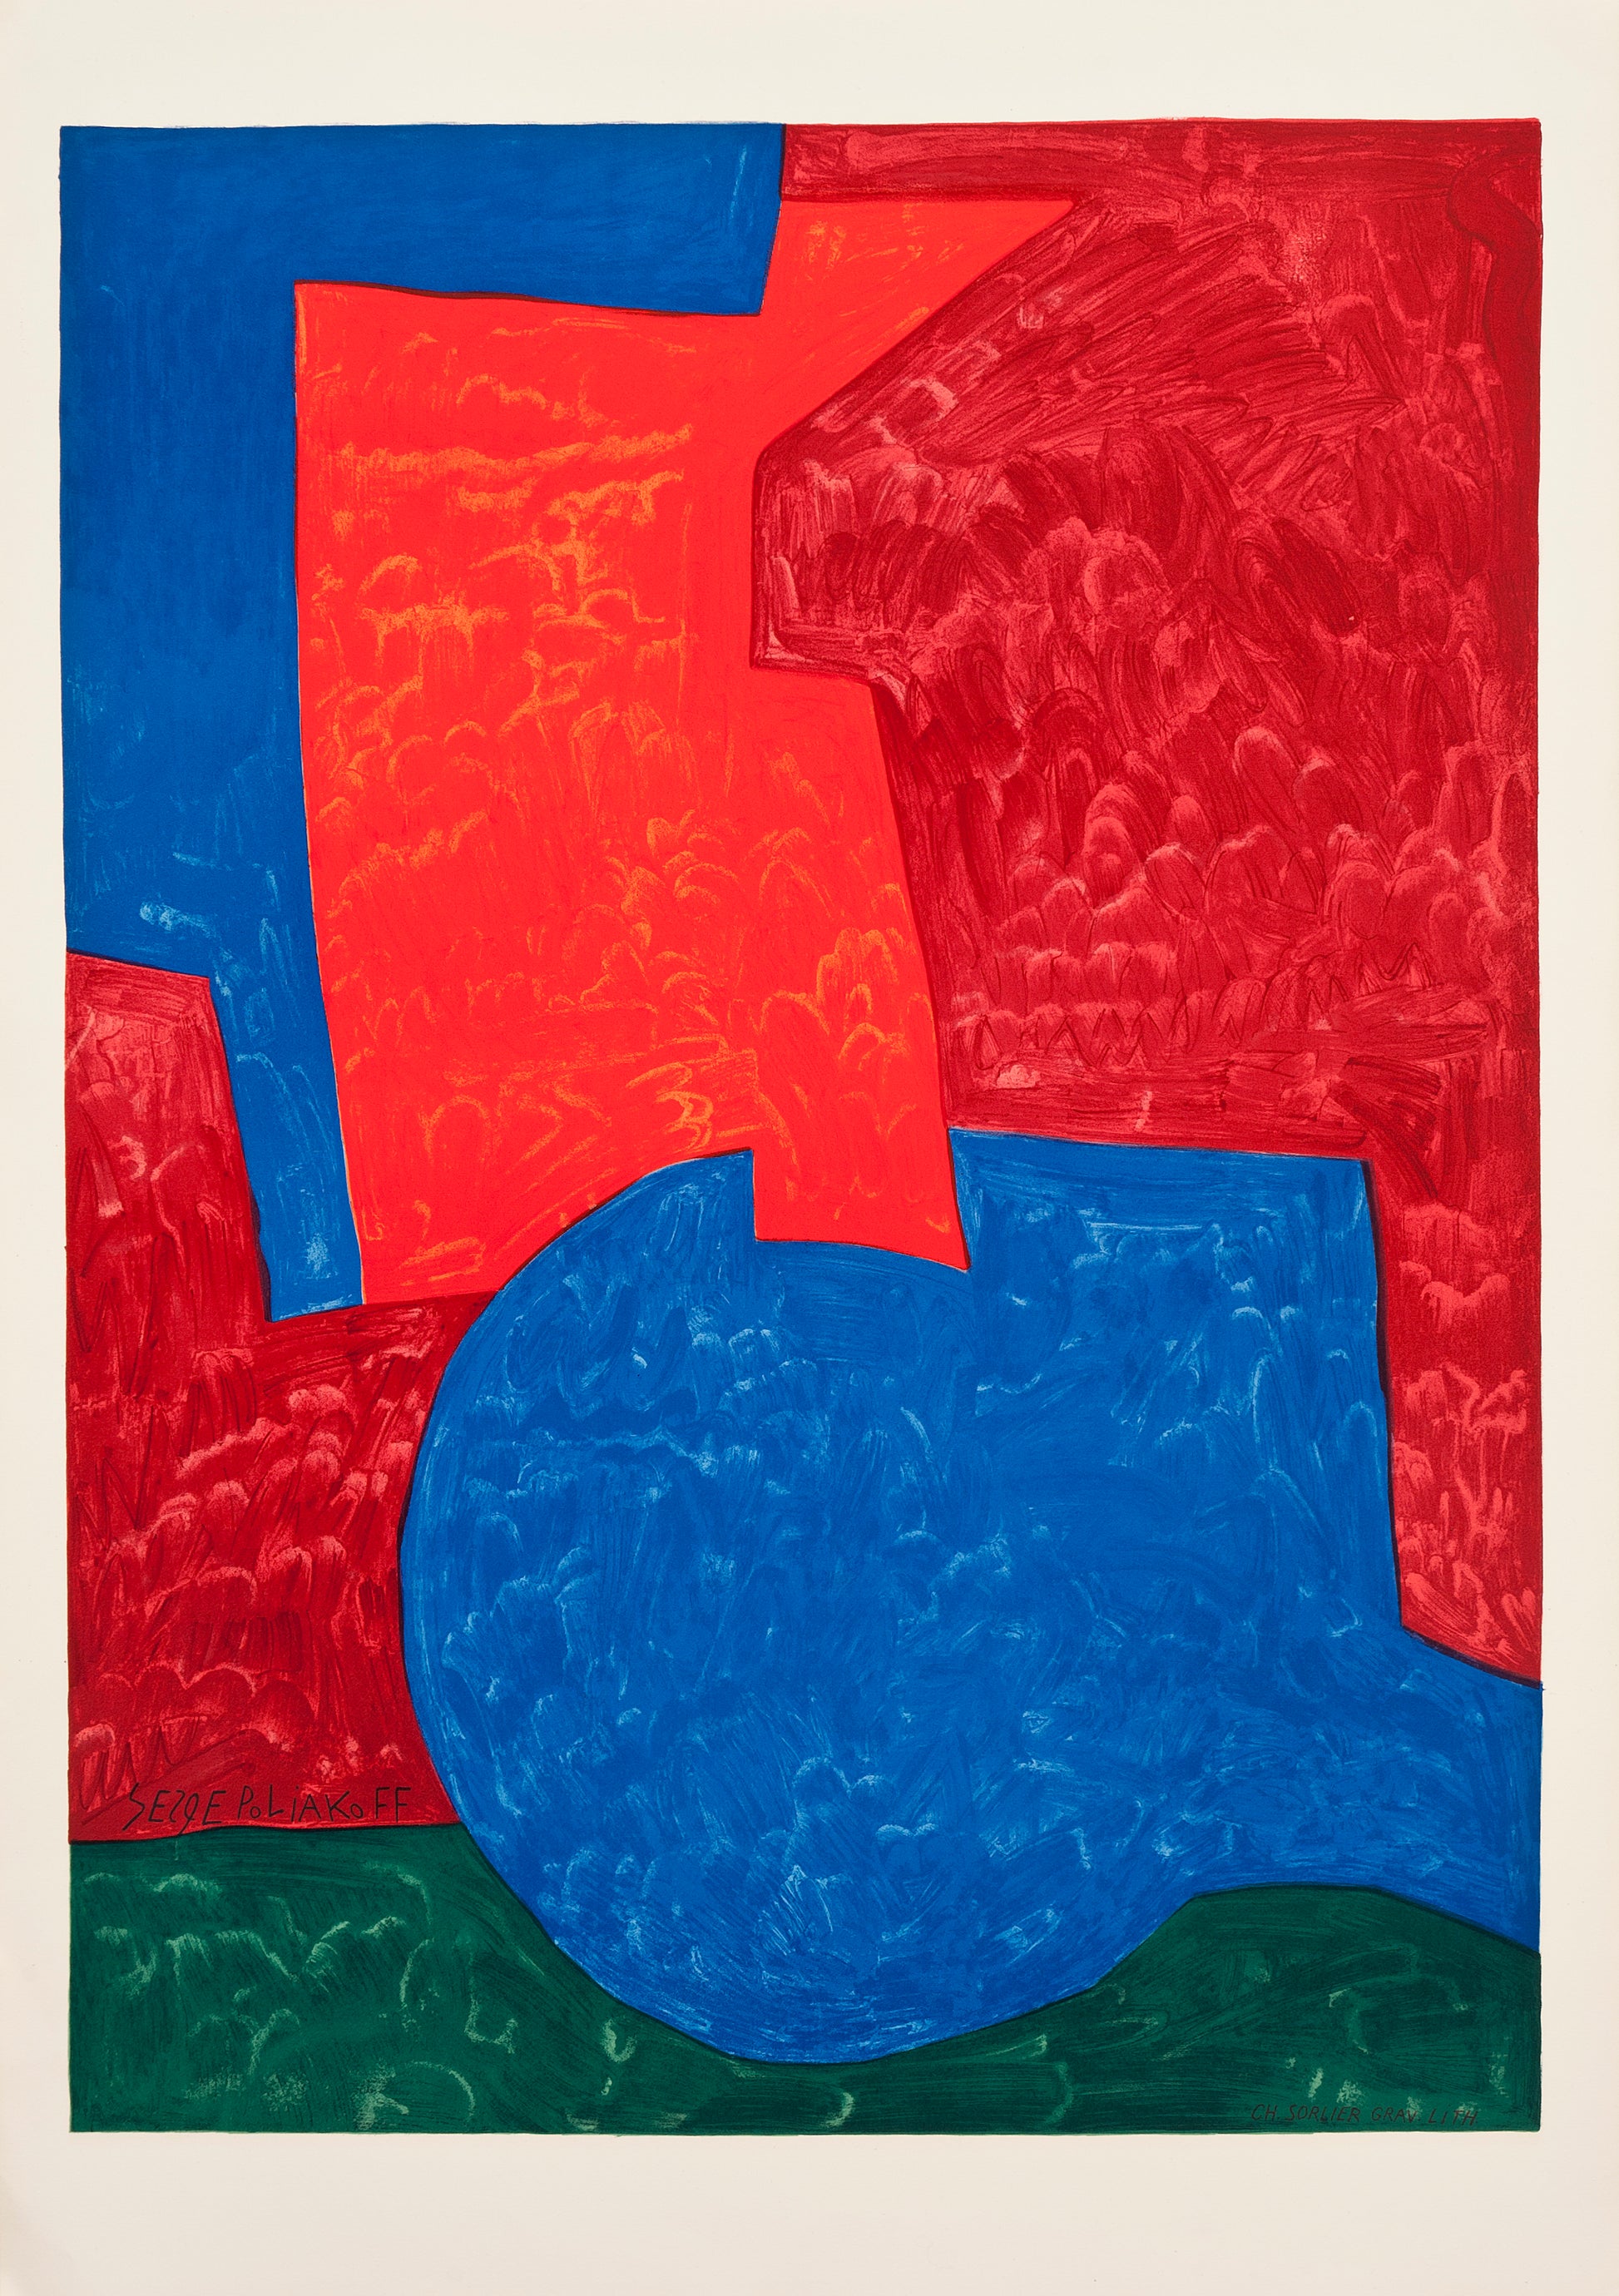 Composition in Red, Blue and Green (after) Serge Poliakoff, 1975 - Mourlot Editions - Fine_Art - Poster - Lithograph - Wall Art - Vintage - Prints - Original